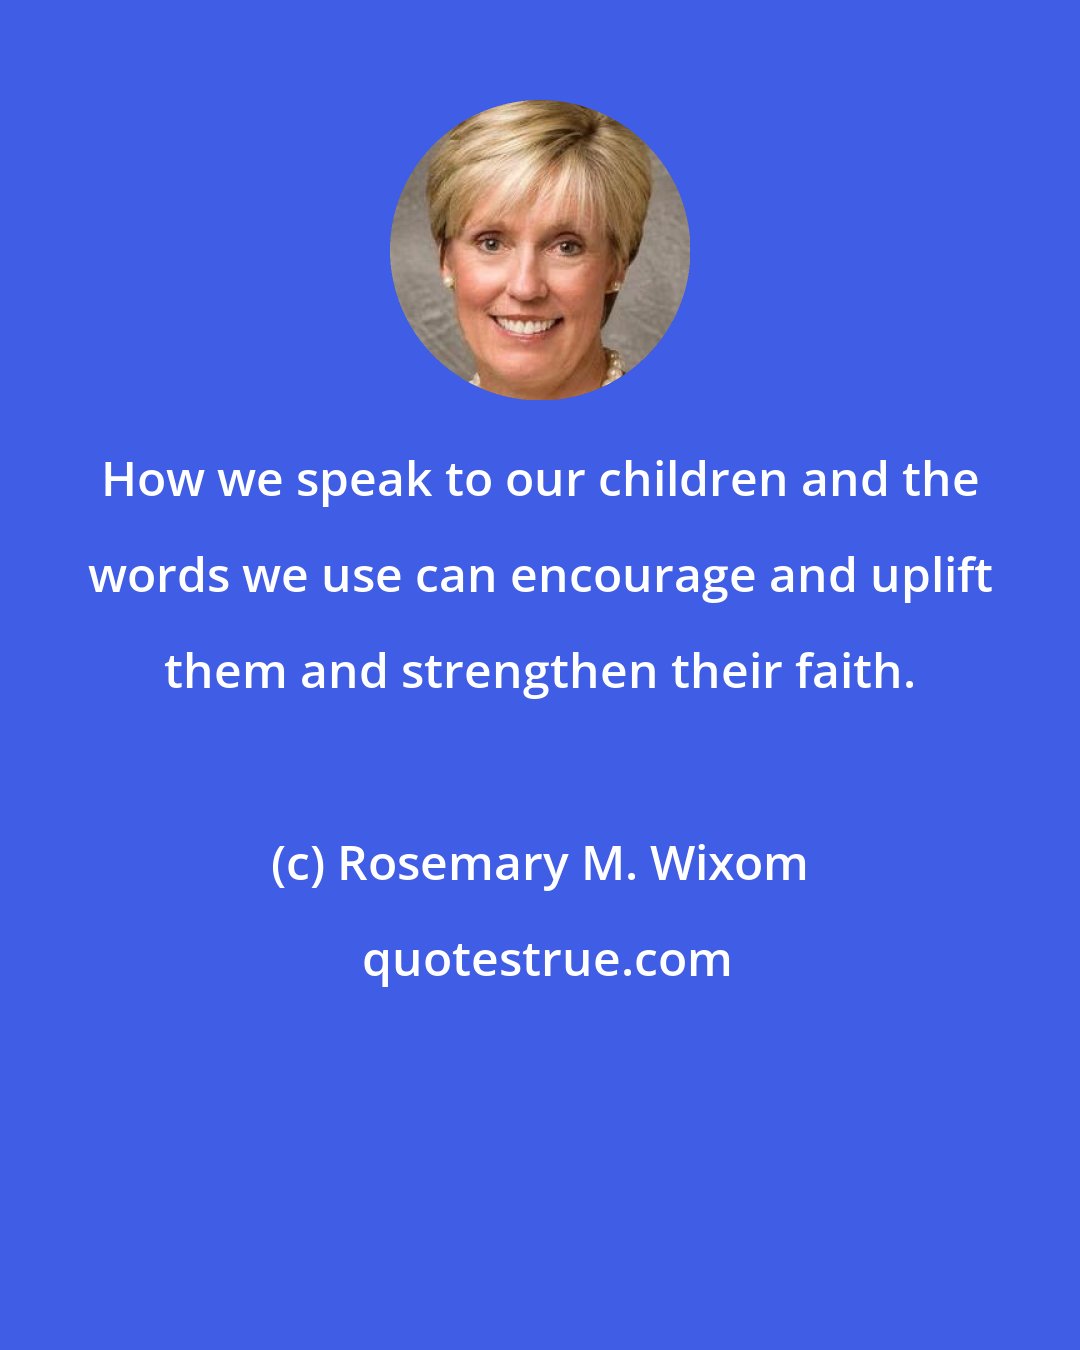 Rosemary M. Wixom: How we speak to our children and the words we use can encourage and uplift them and strengthen their faith.